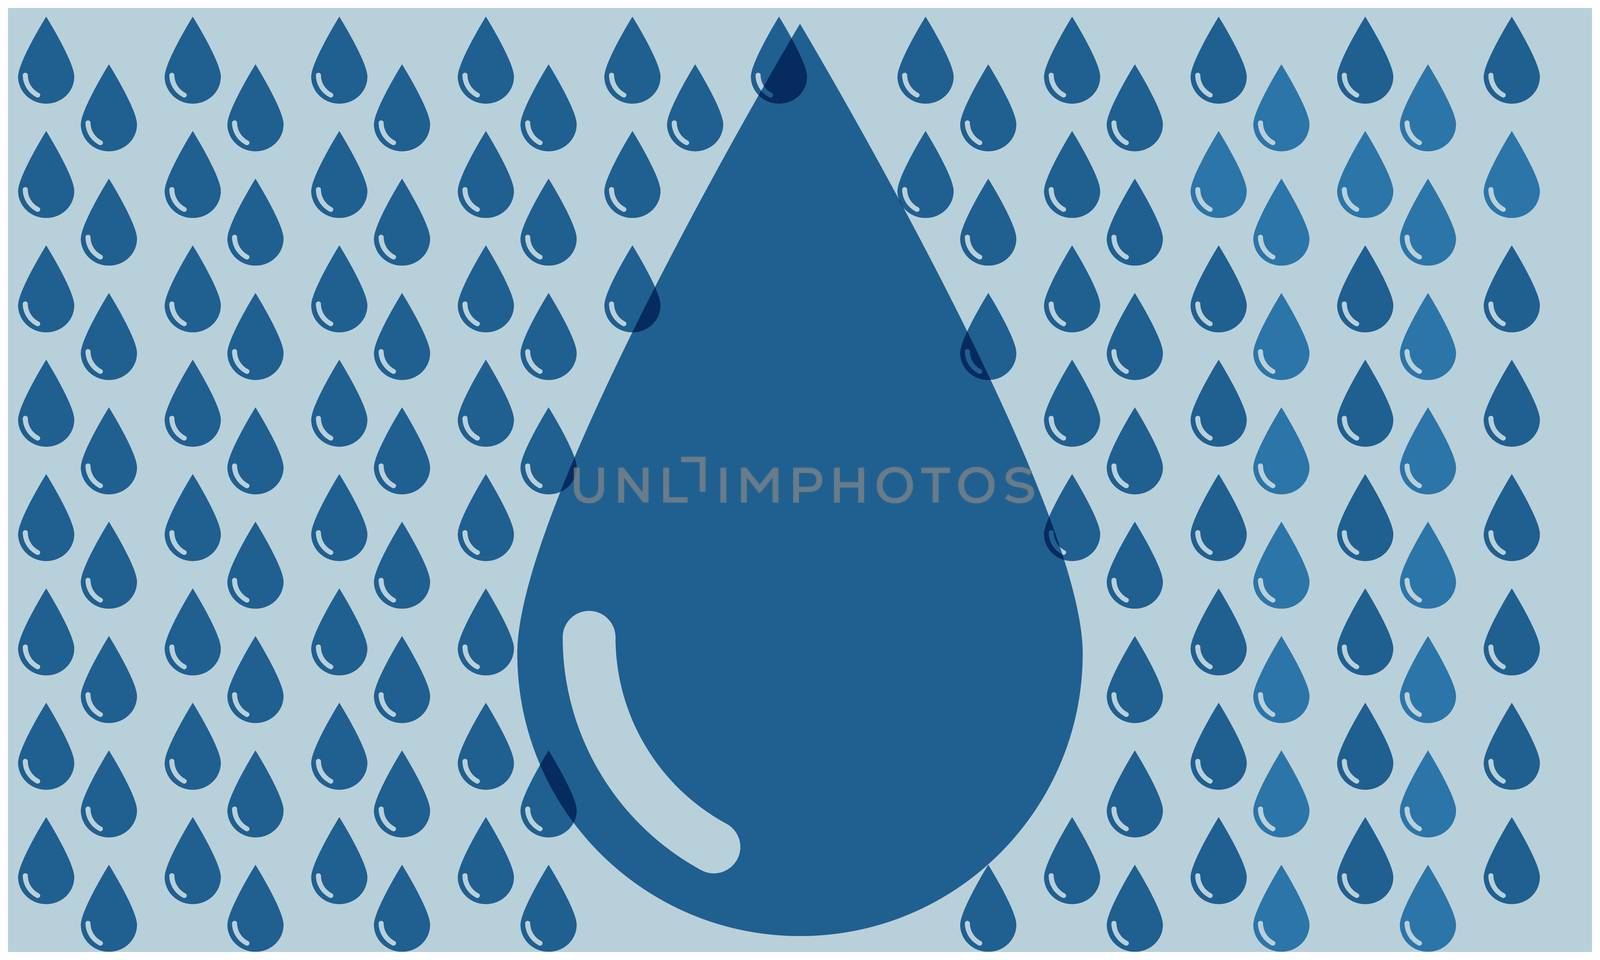 digital textile design of water drop on abstract background by aanavcreationsplus